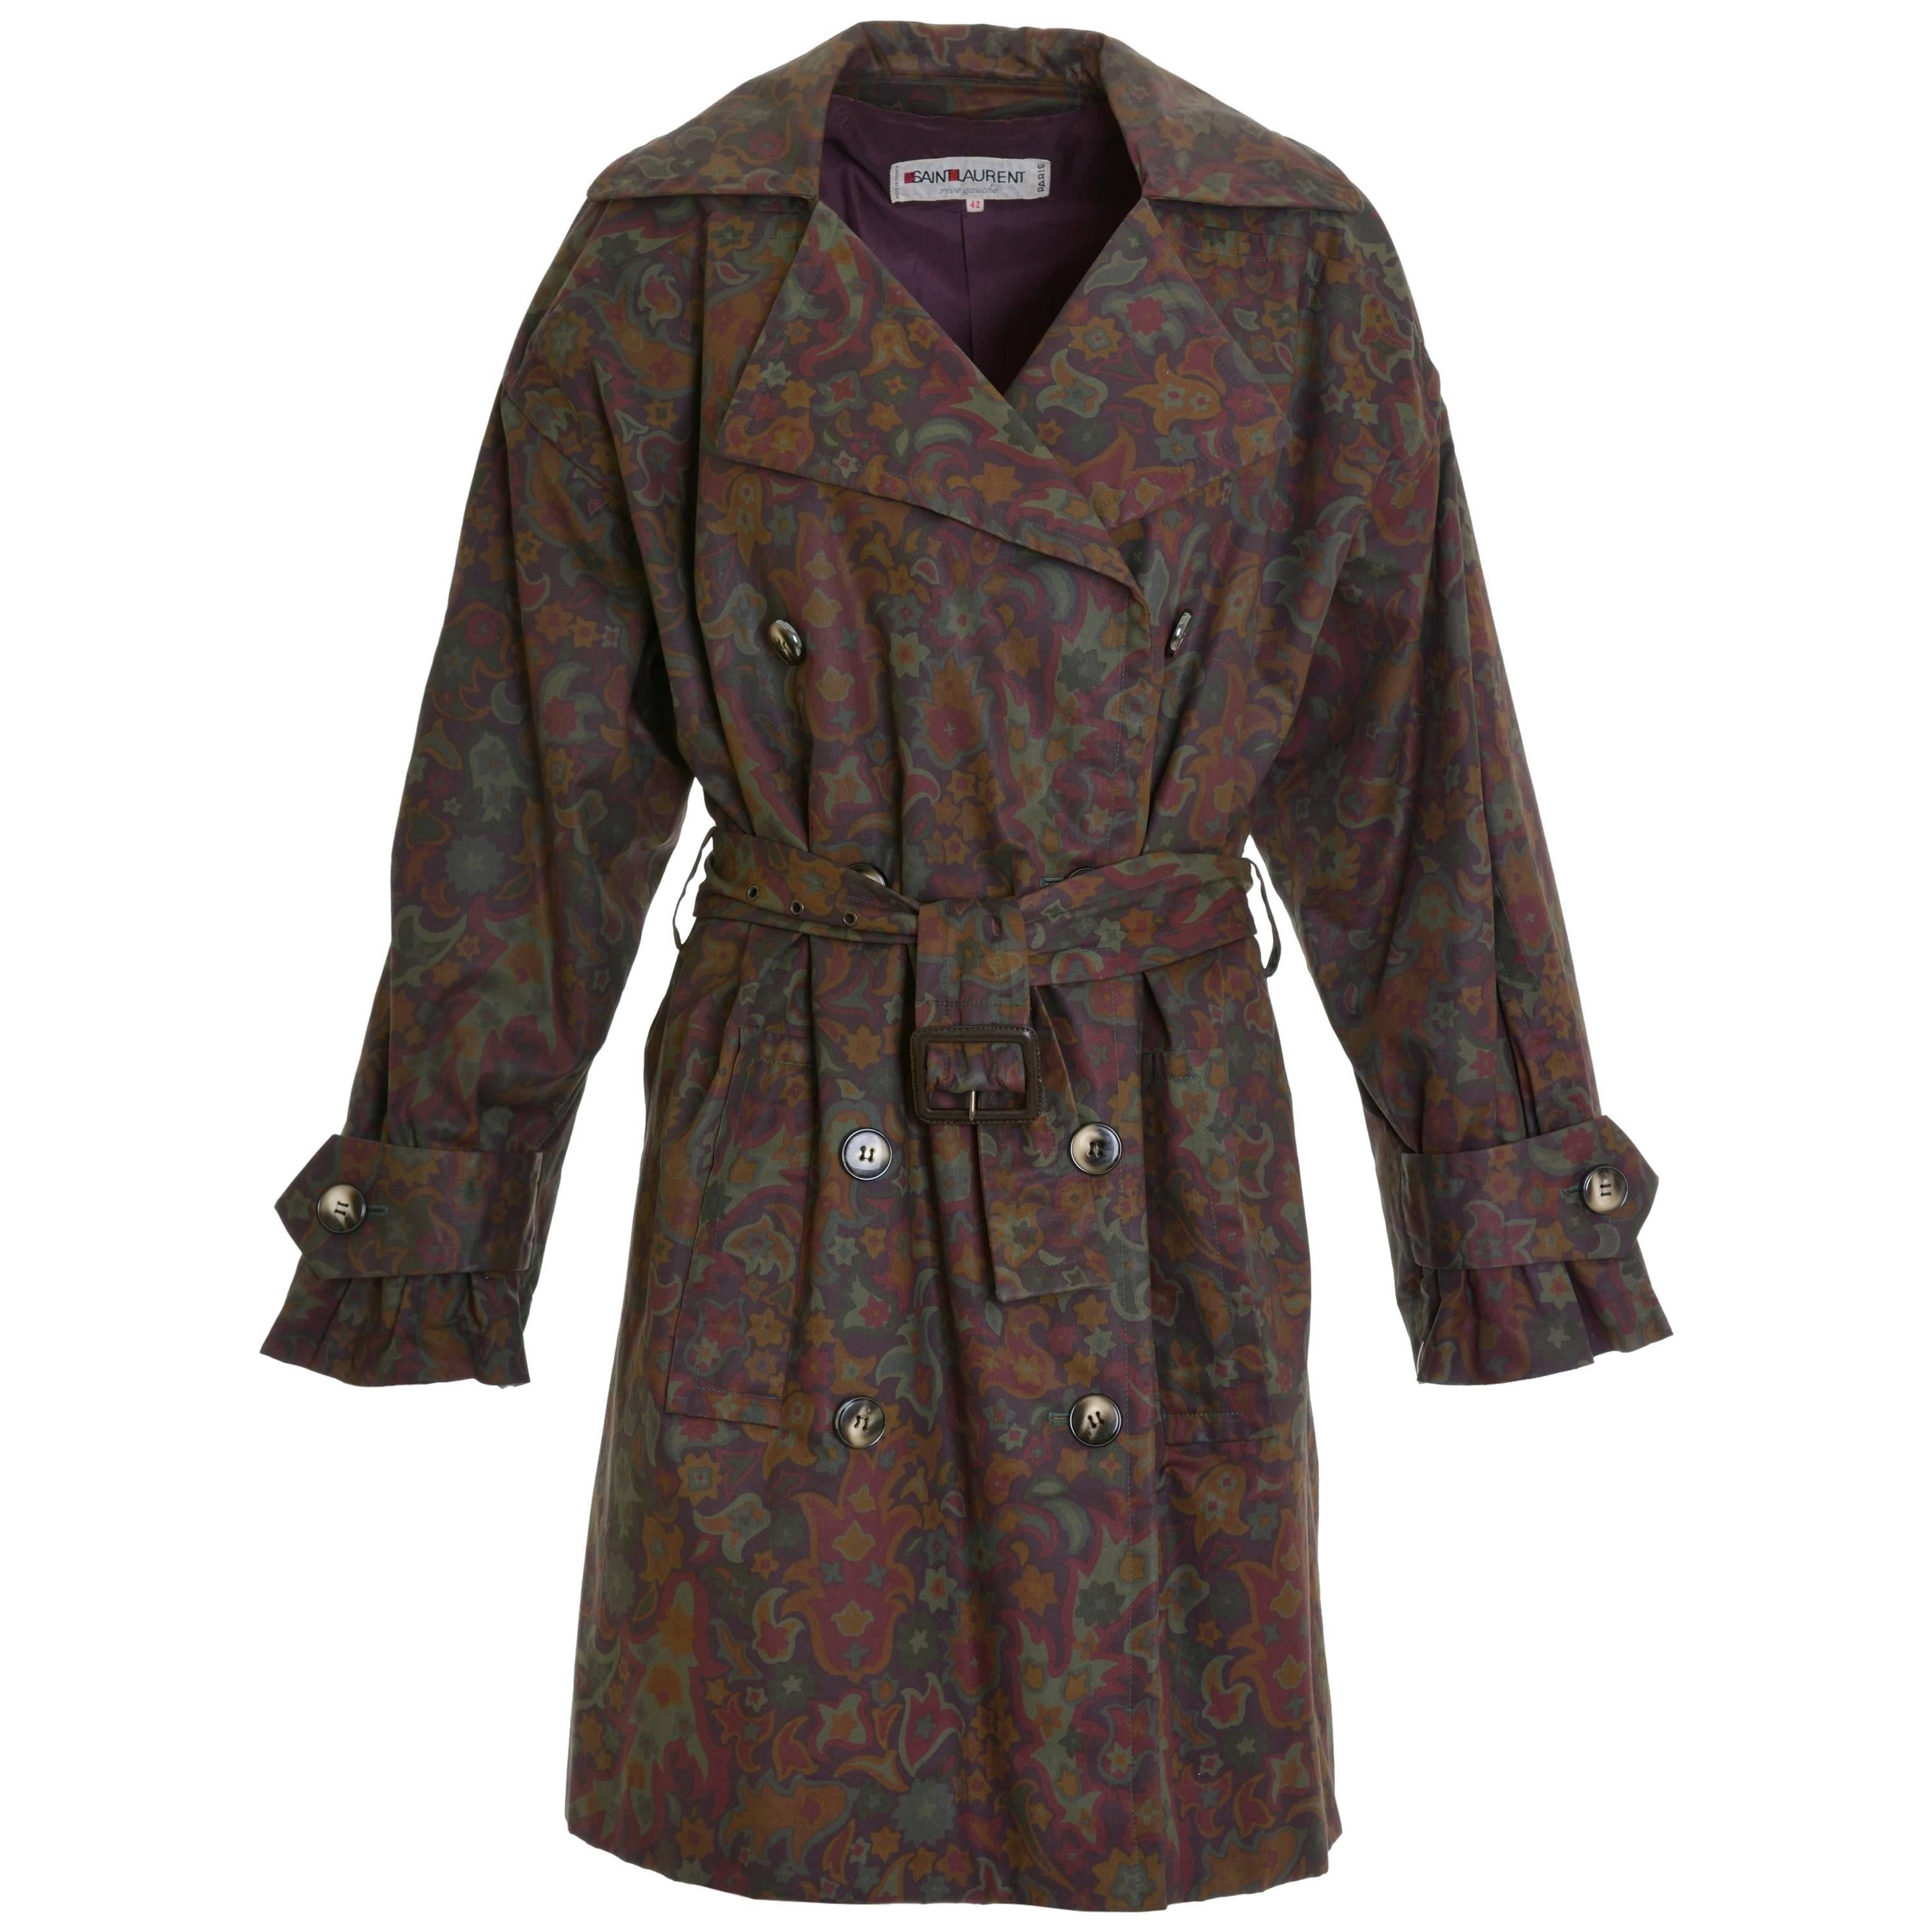 1980s YVES SAINT LAURENT Purple and Green Floral Print Trench Coat For Sale